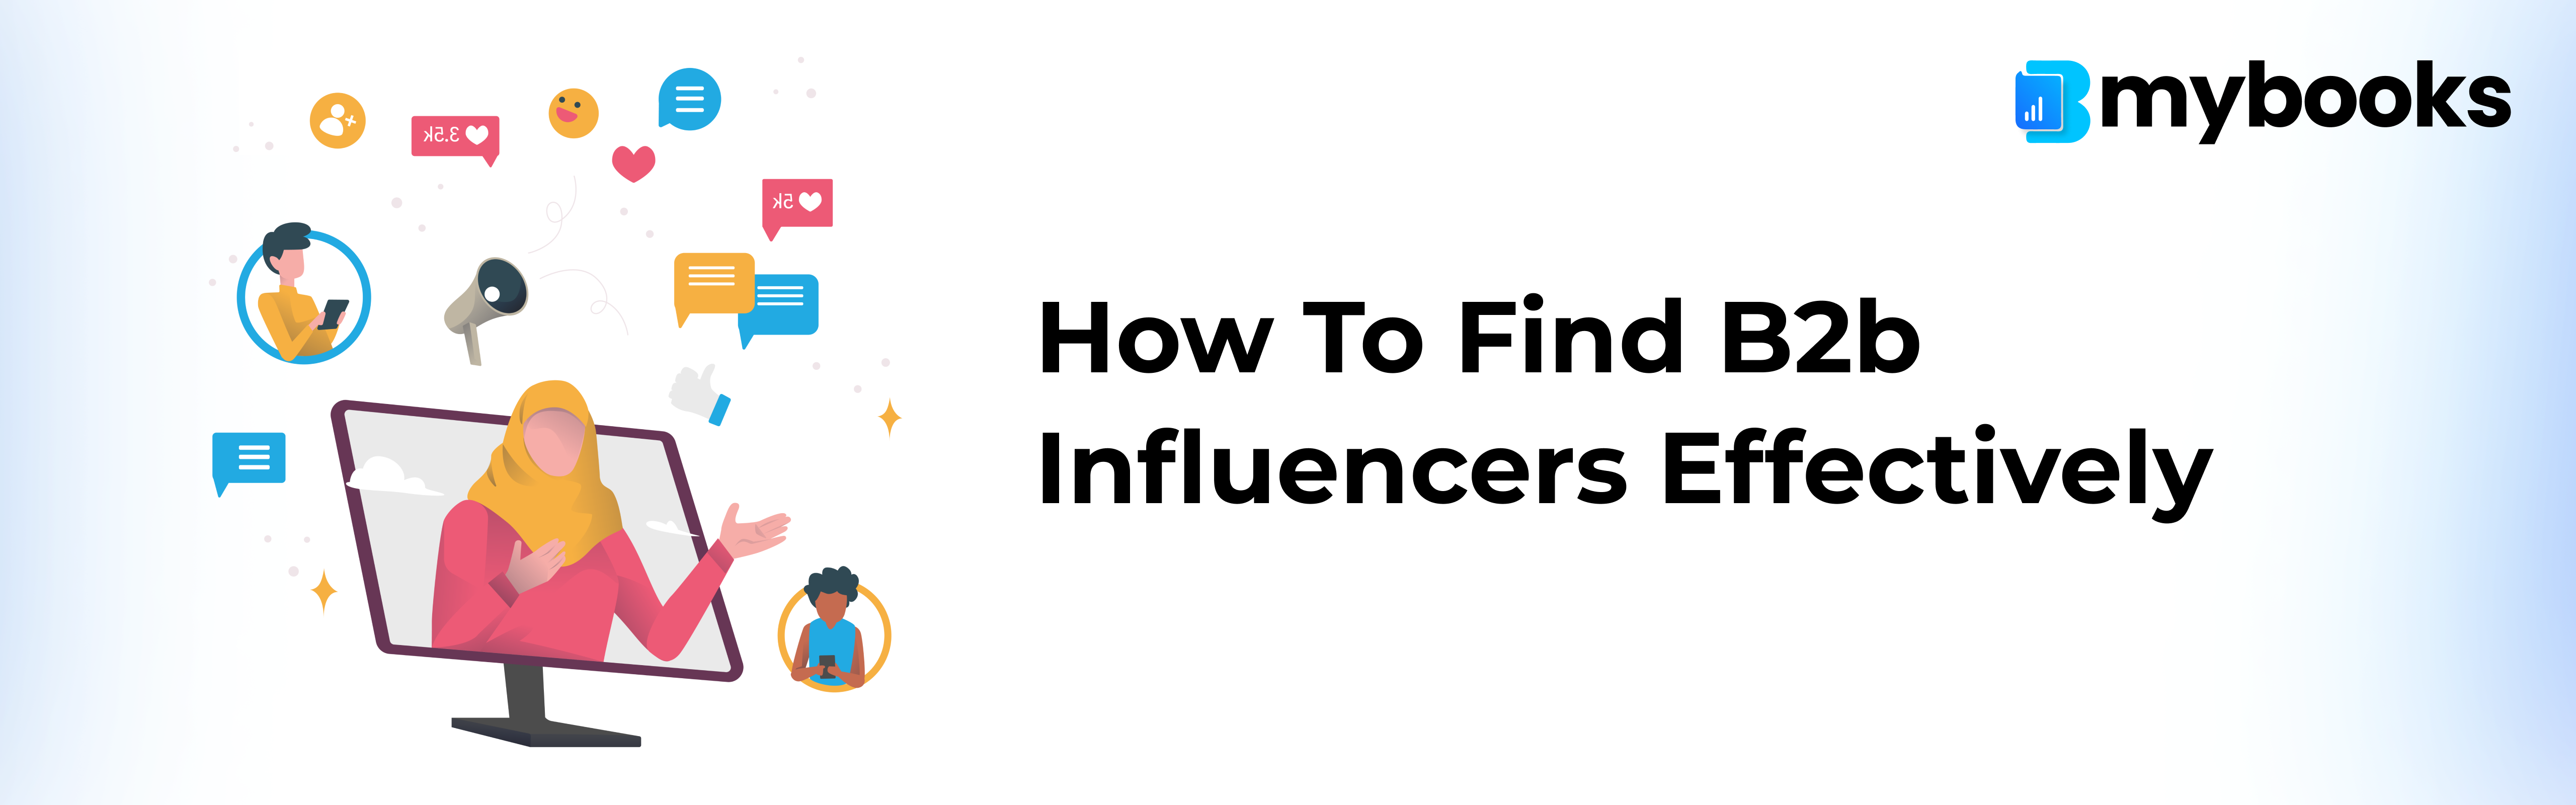 How-to-find-b2b-influencer-effectively